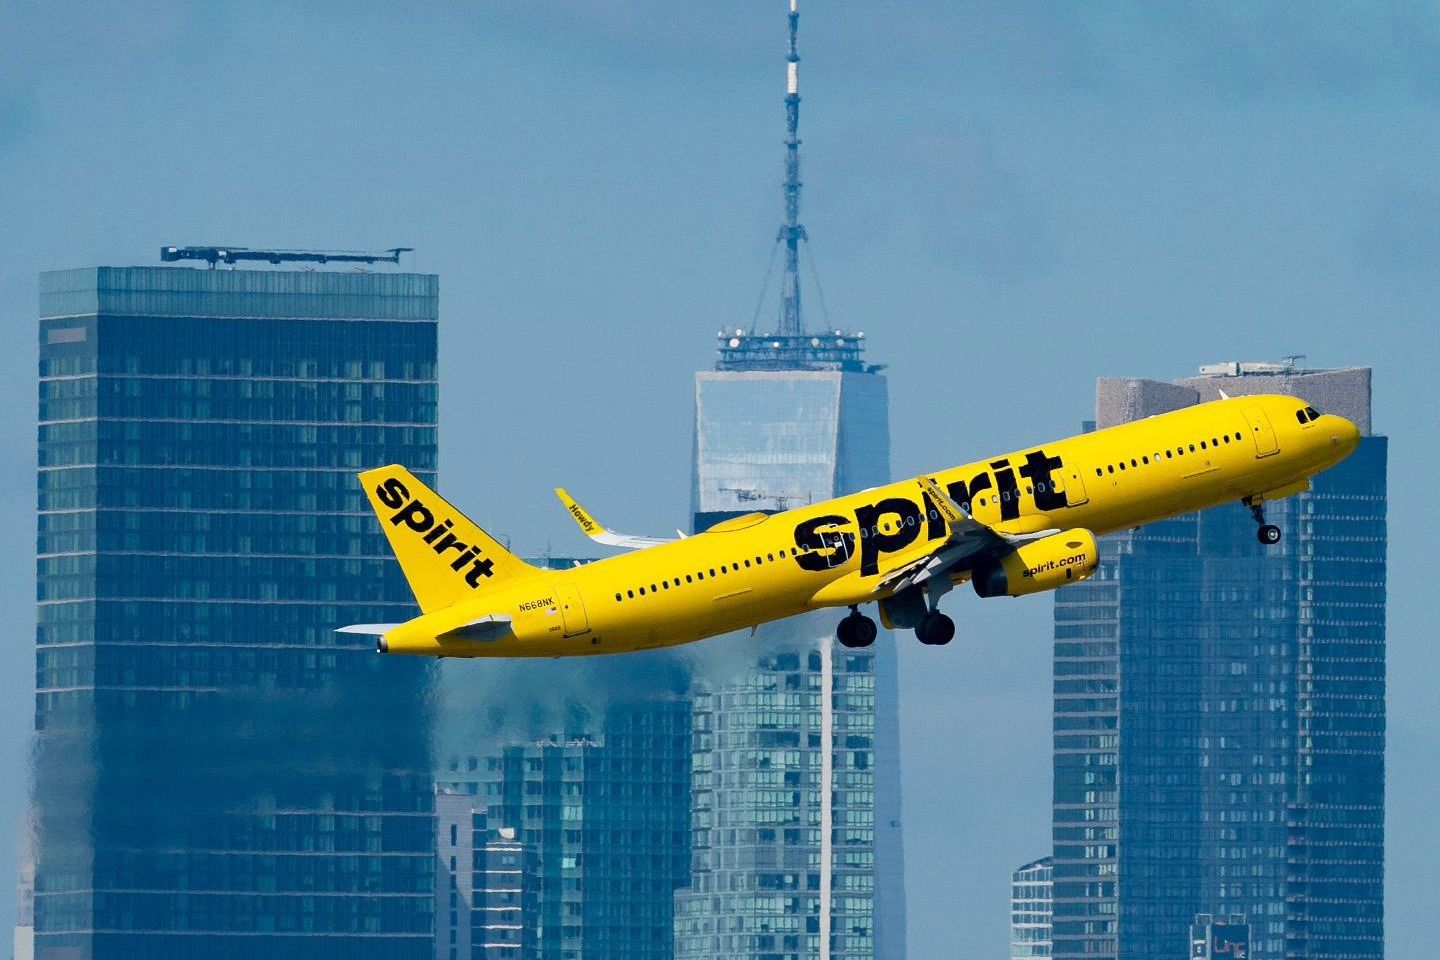 Spirit Airlines Airbus A321 taking off.